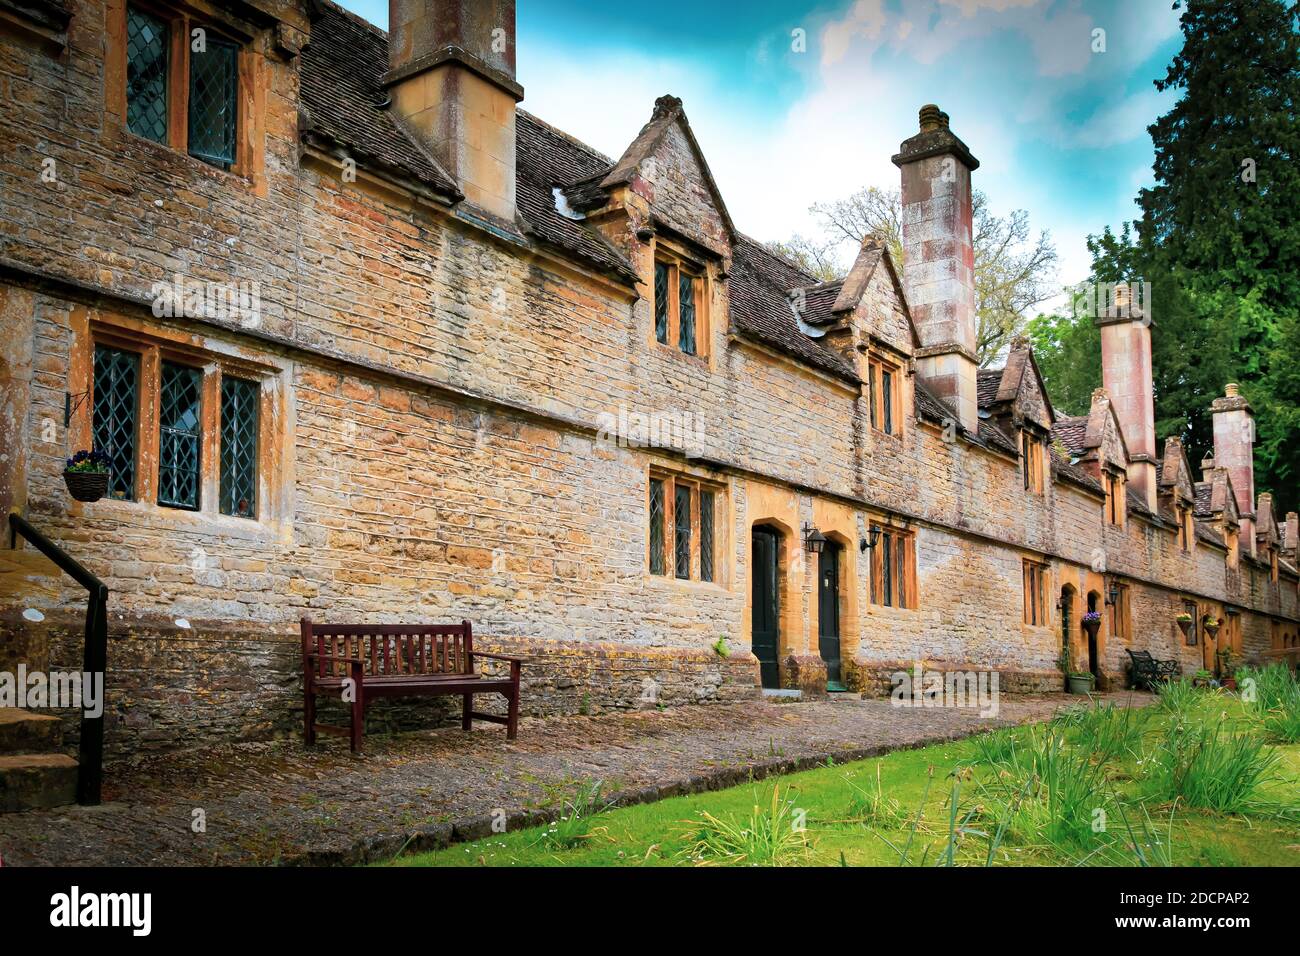 A historical architectural gem, the Helyar Almshouses, constructed of local Ham-stone in 1640-60, in the village of East Coker, Somerset, England. Stock Photo